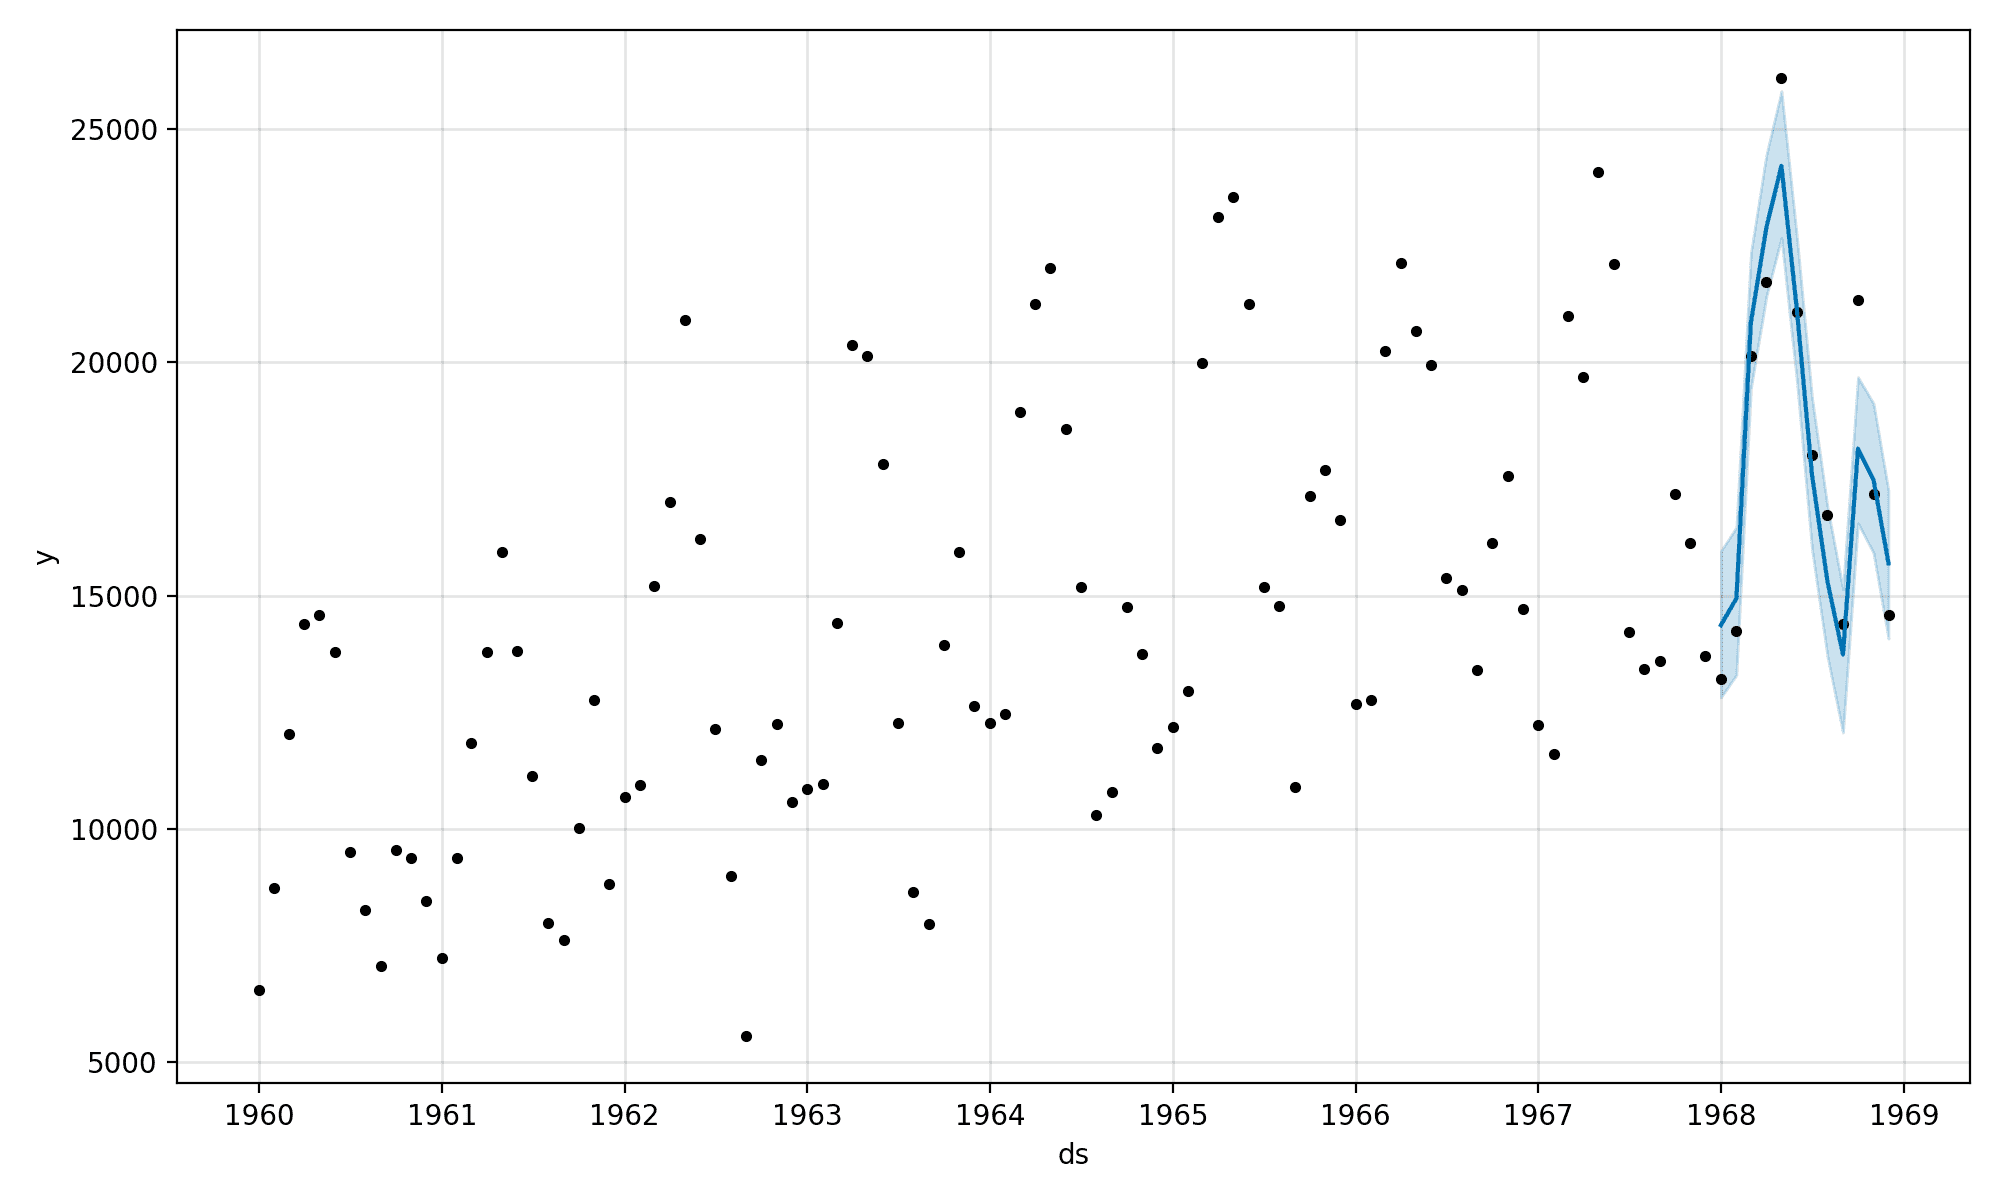 Plot of Time Series and In-Sample Forecast With Prophet